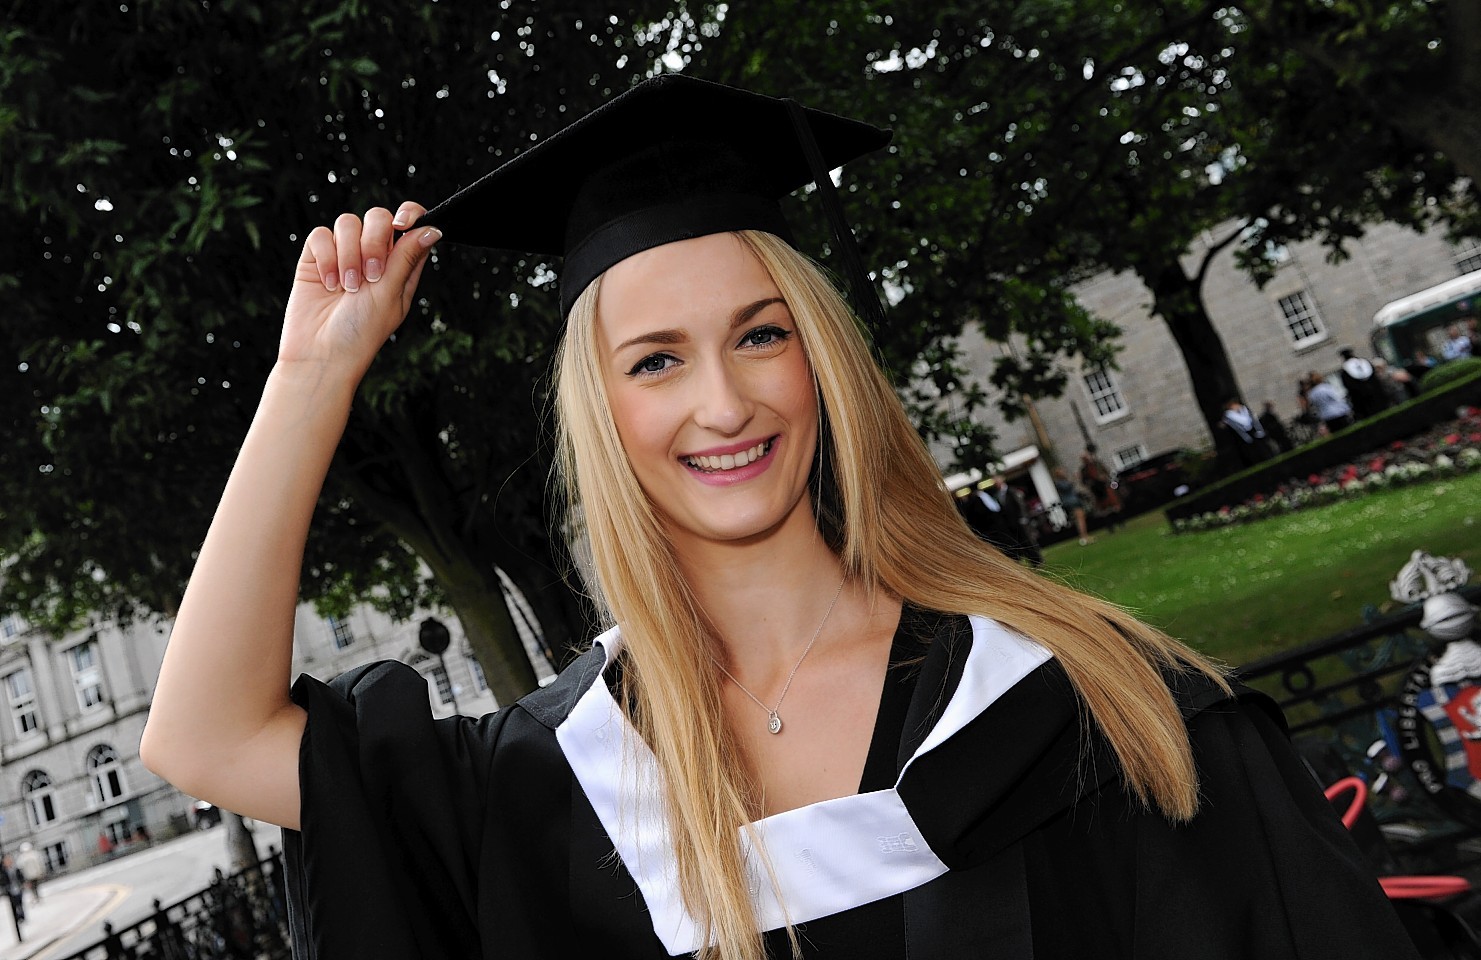 Gemma graduates with a degree in nutrition and dietetics